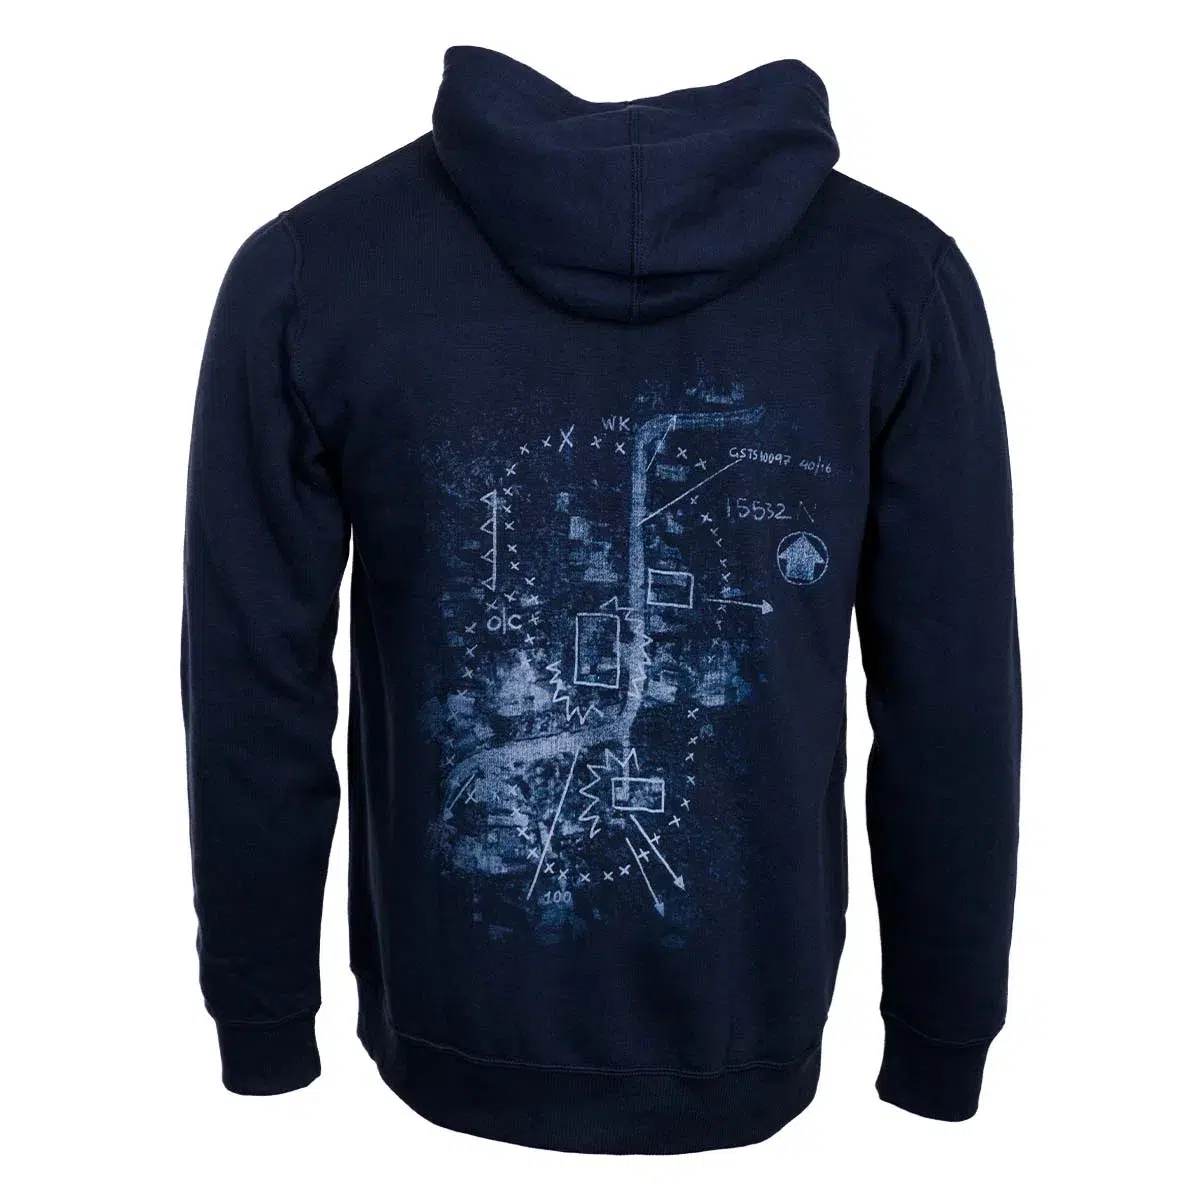 Call of Duty: Zipper Hoodie "Operation" Navy M Image 2